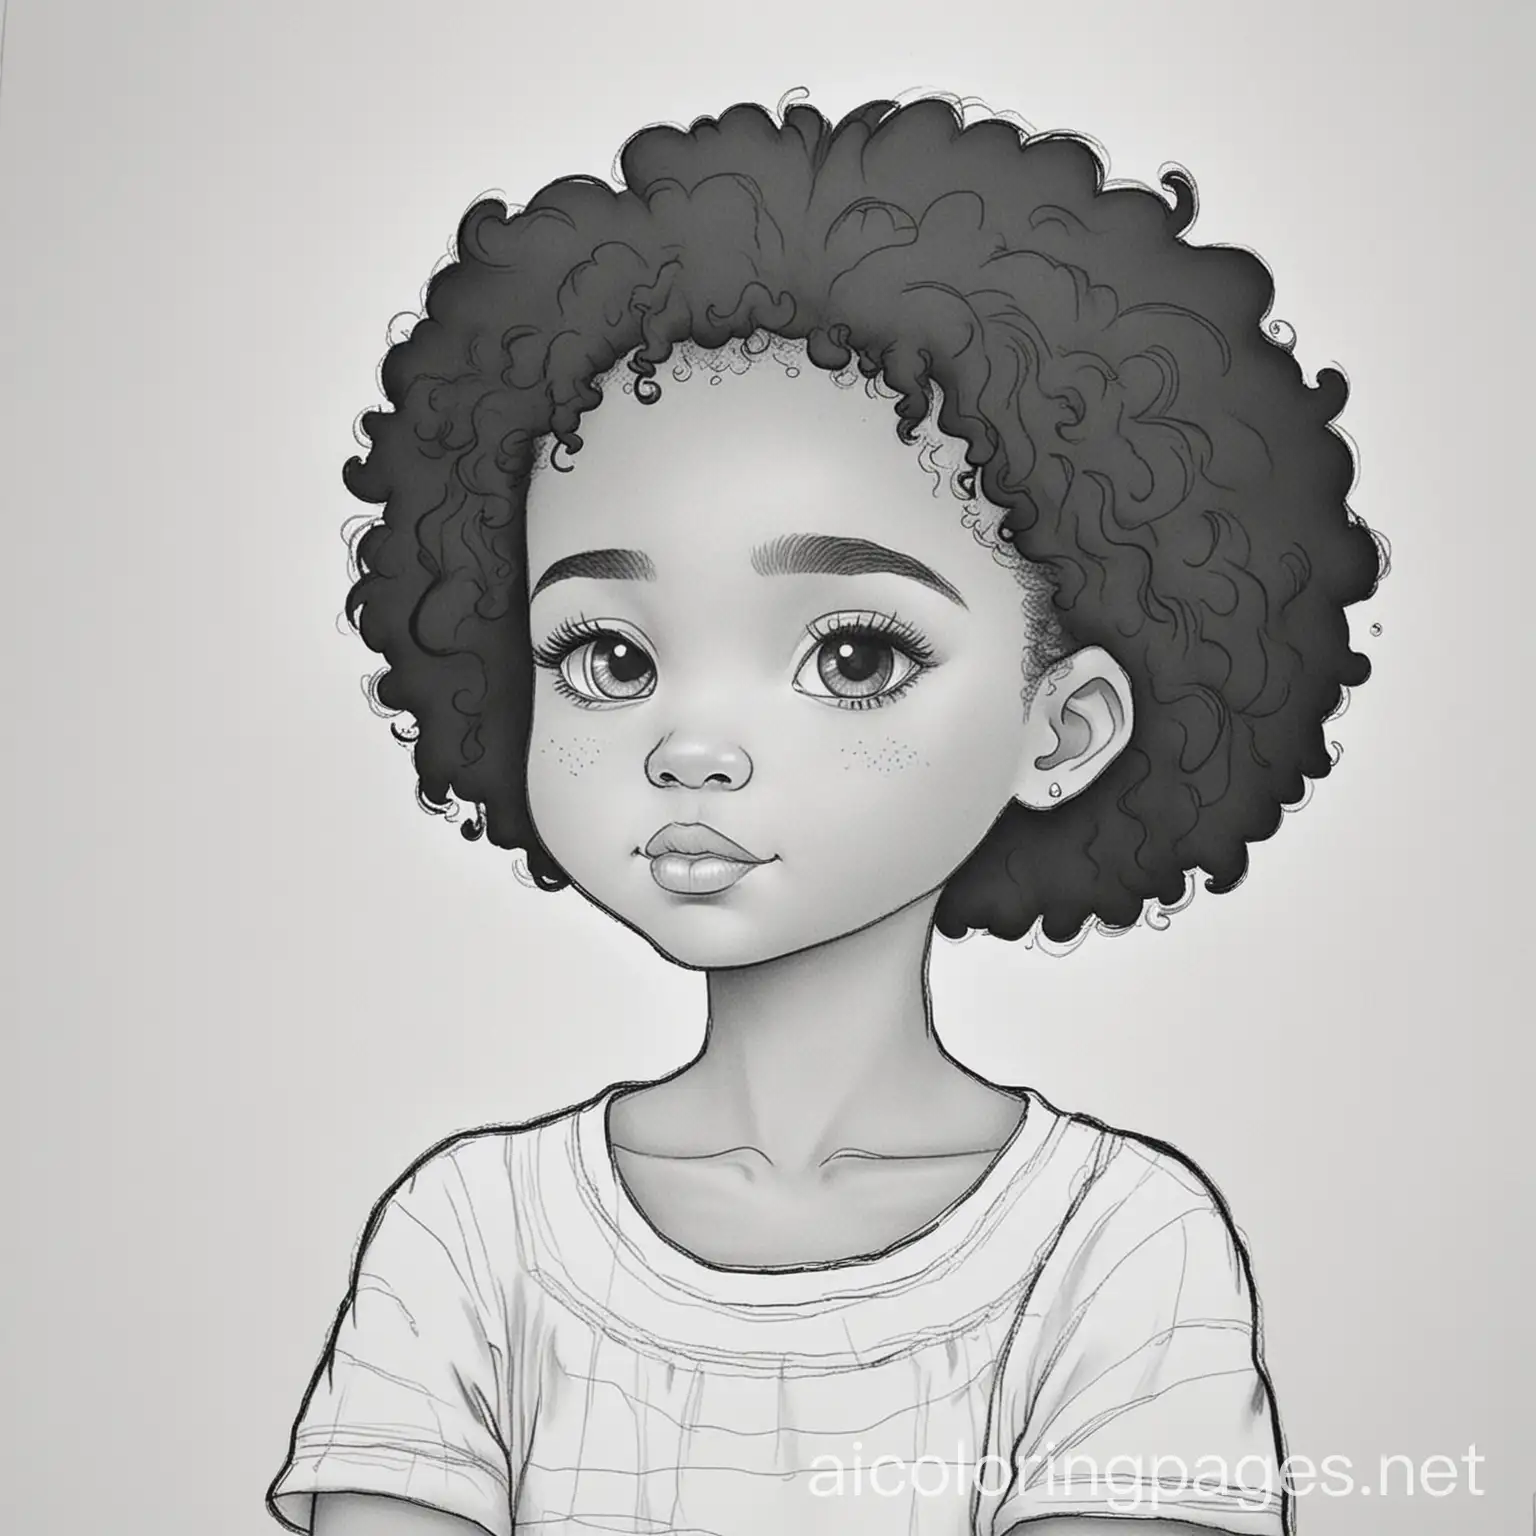 black girl feeling lost, Coloring Page, black and white, line art, white background, Simplicity, Ample White Space. The background of the coloring page is plain white to make it easy for young children to color within the lines. The outlines of all the subjects are easy to distinguish, making it simple for kids to color without too much difficulty